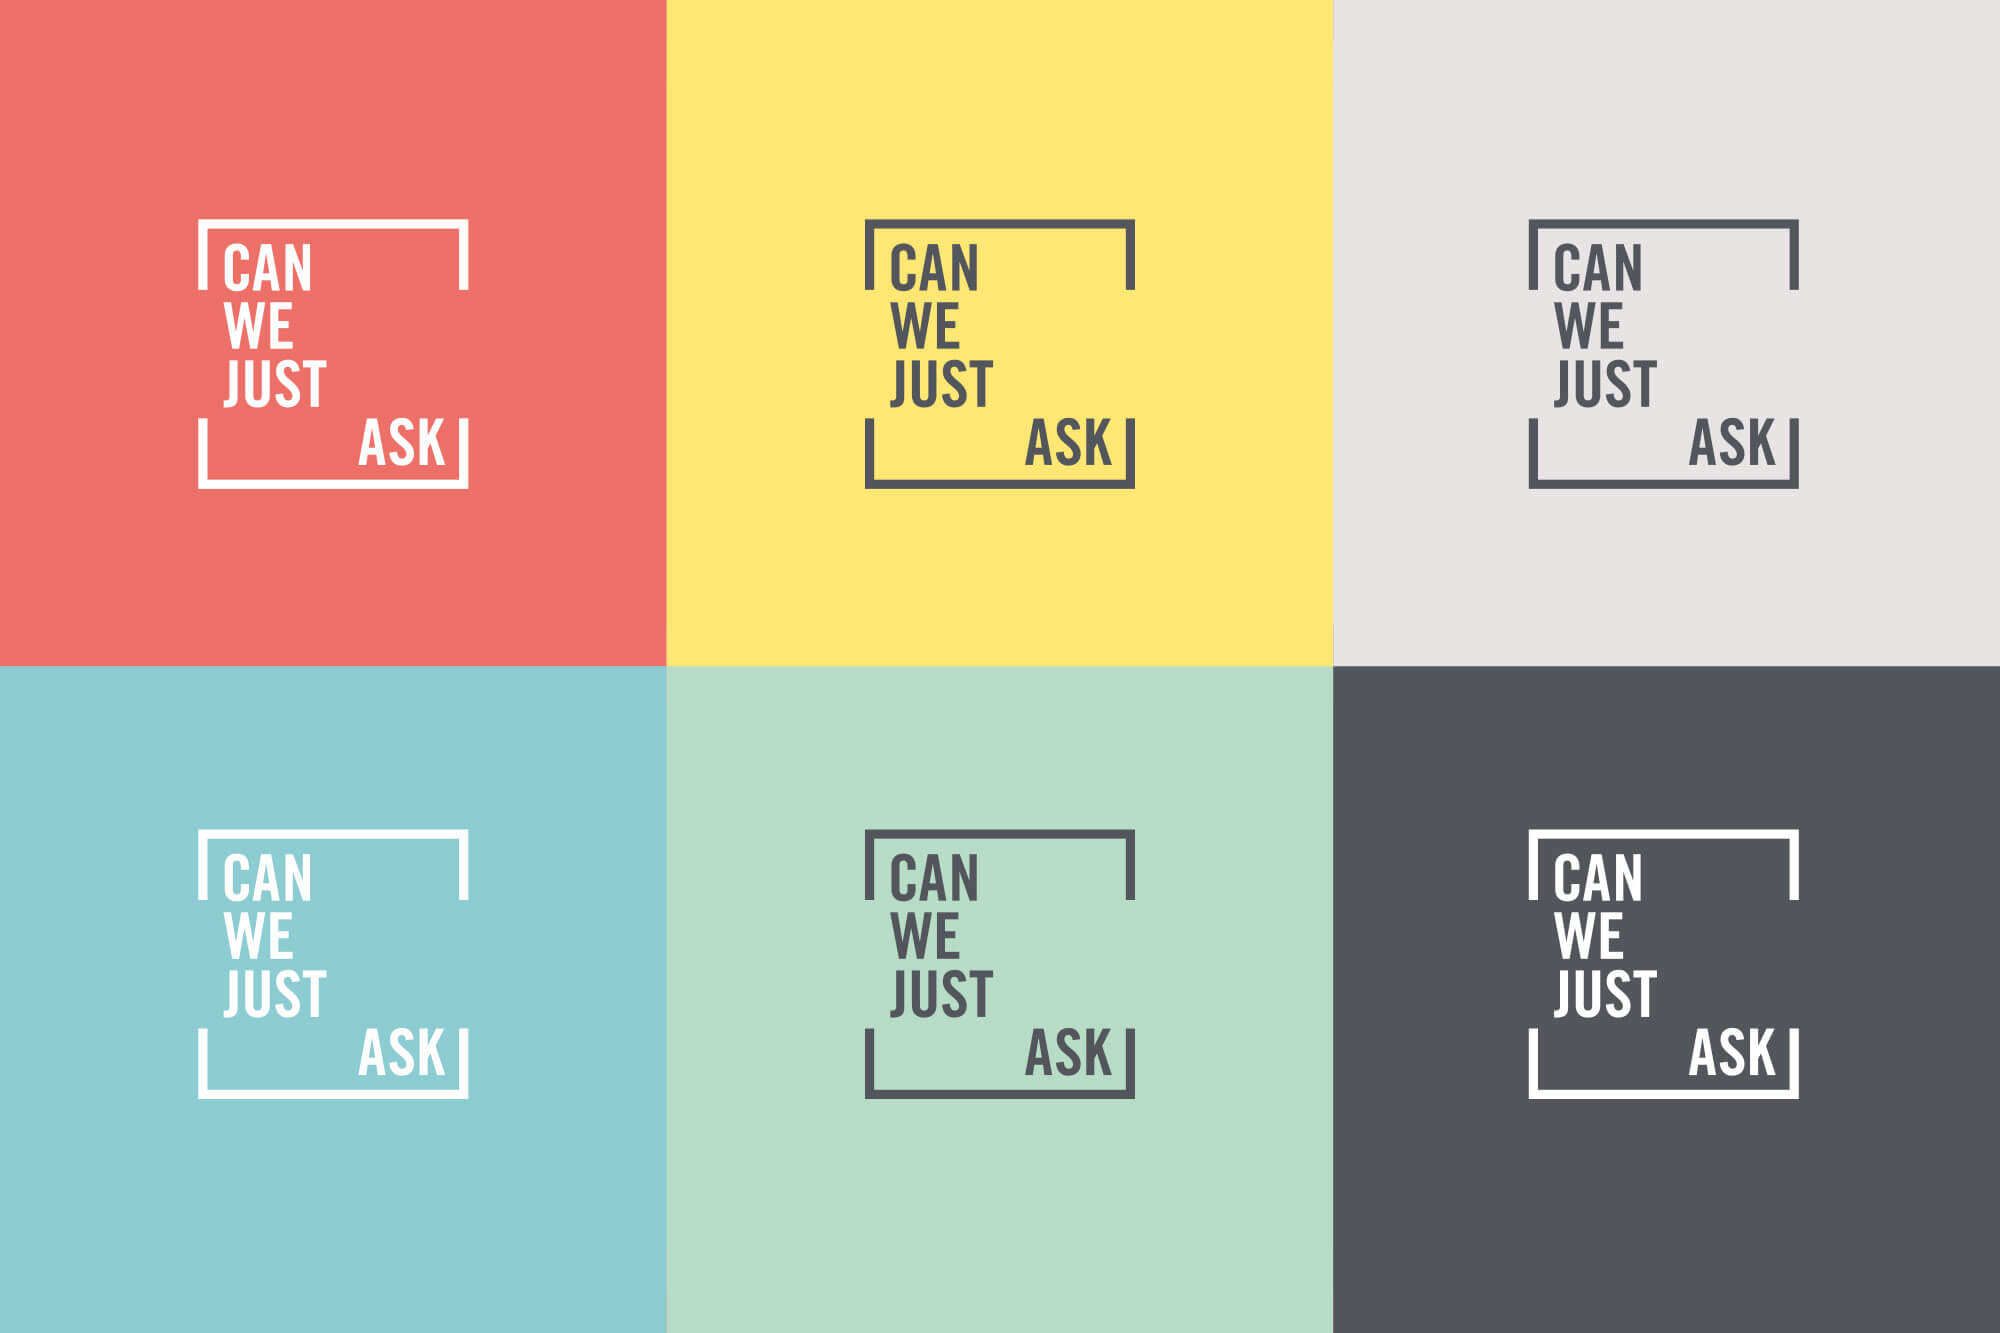 gpj-design-can-we-just-ask-brand-identity-cs-04